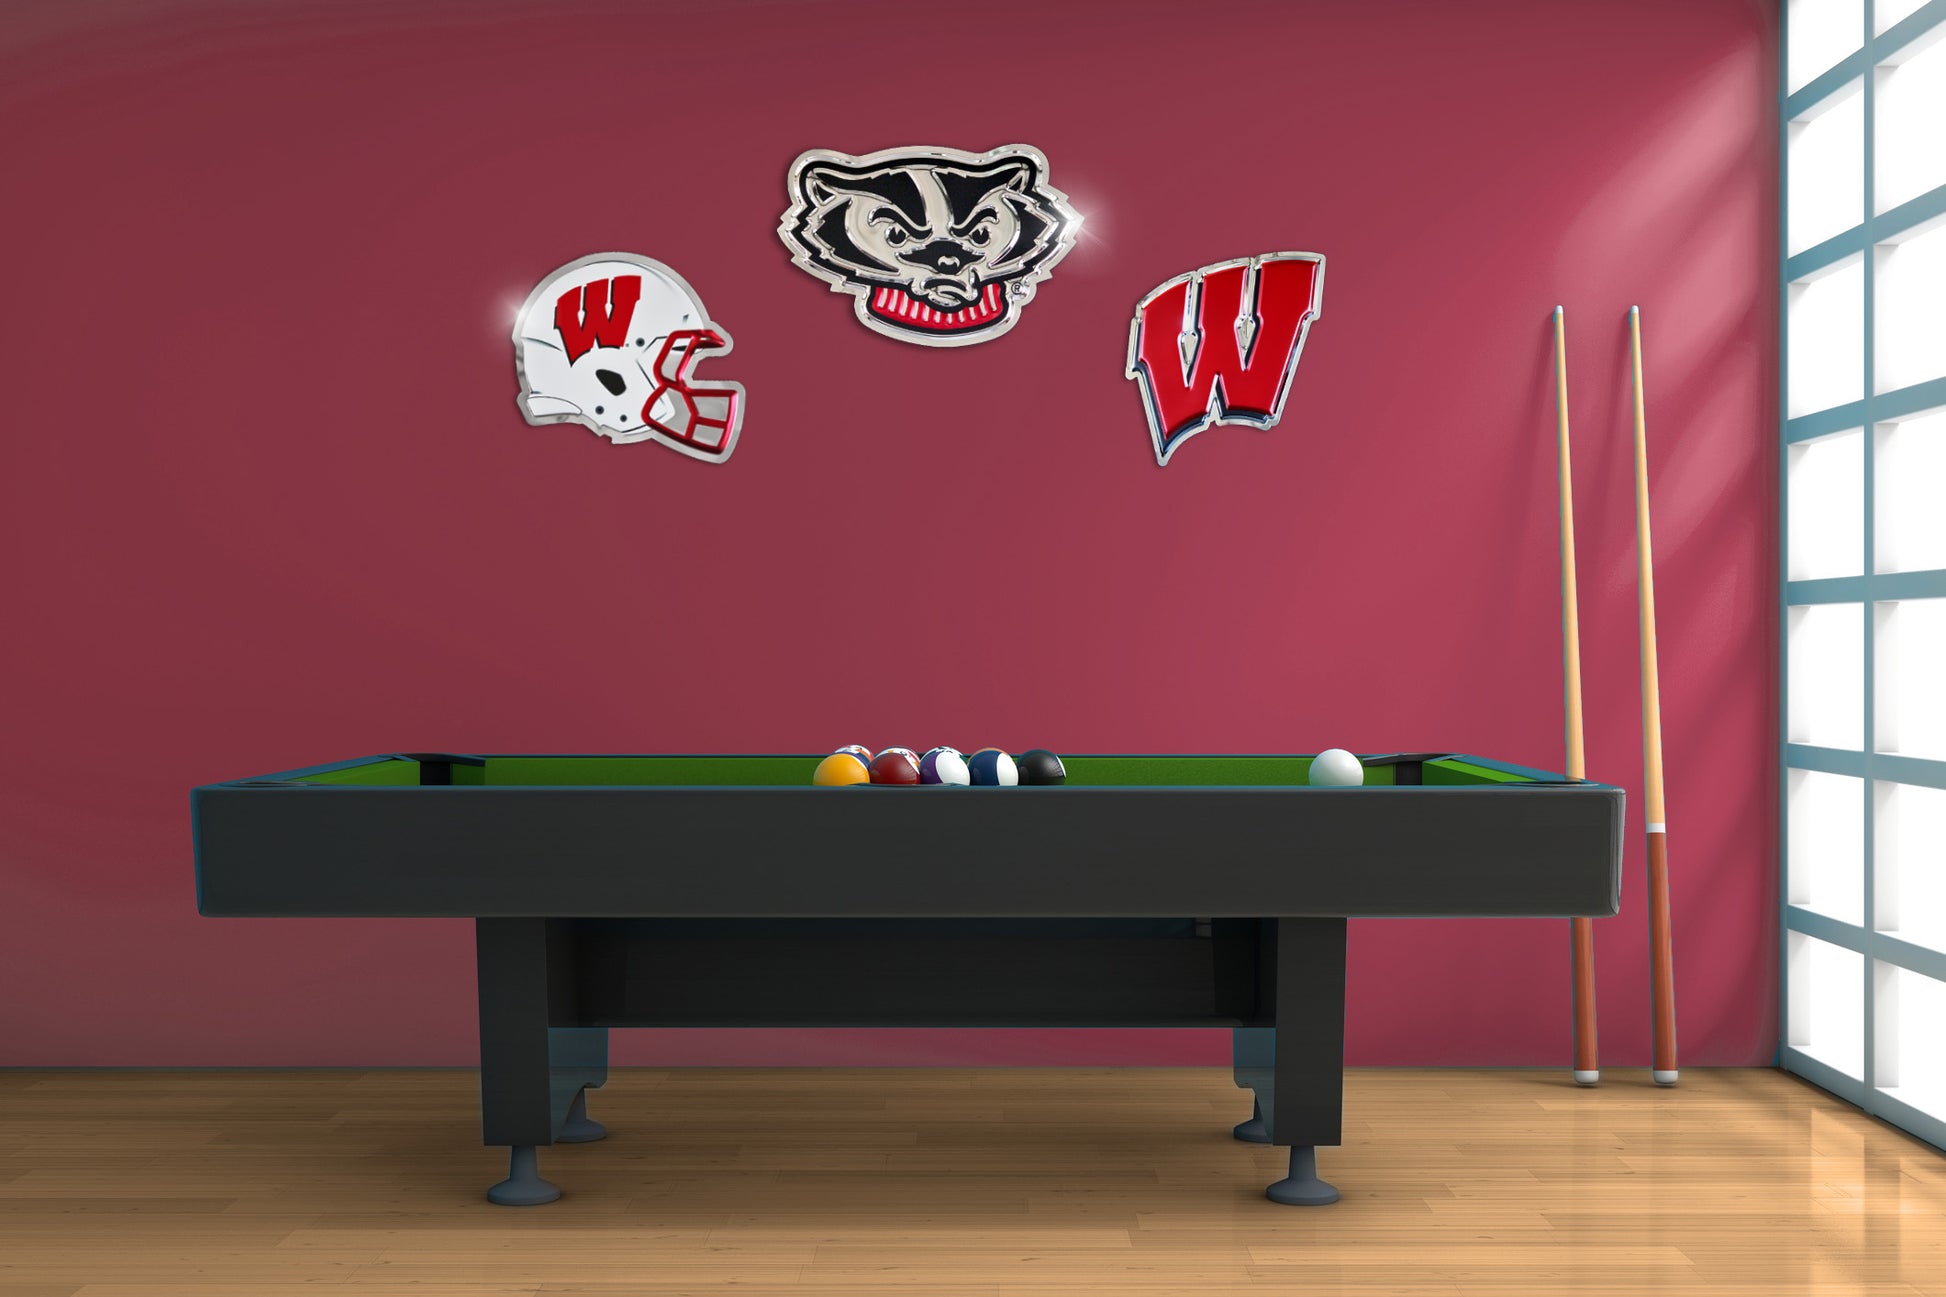 embossed mirror polished stainless steel sign garage décor Wisconsin Badgers Motion W on wall